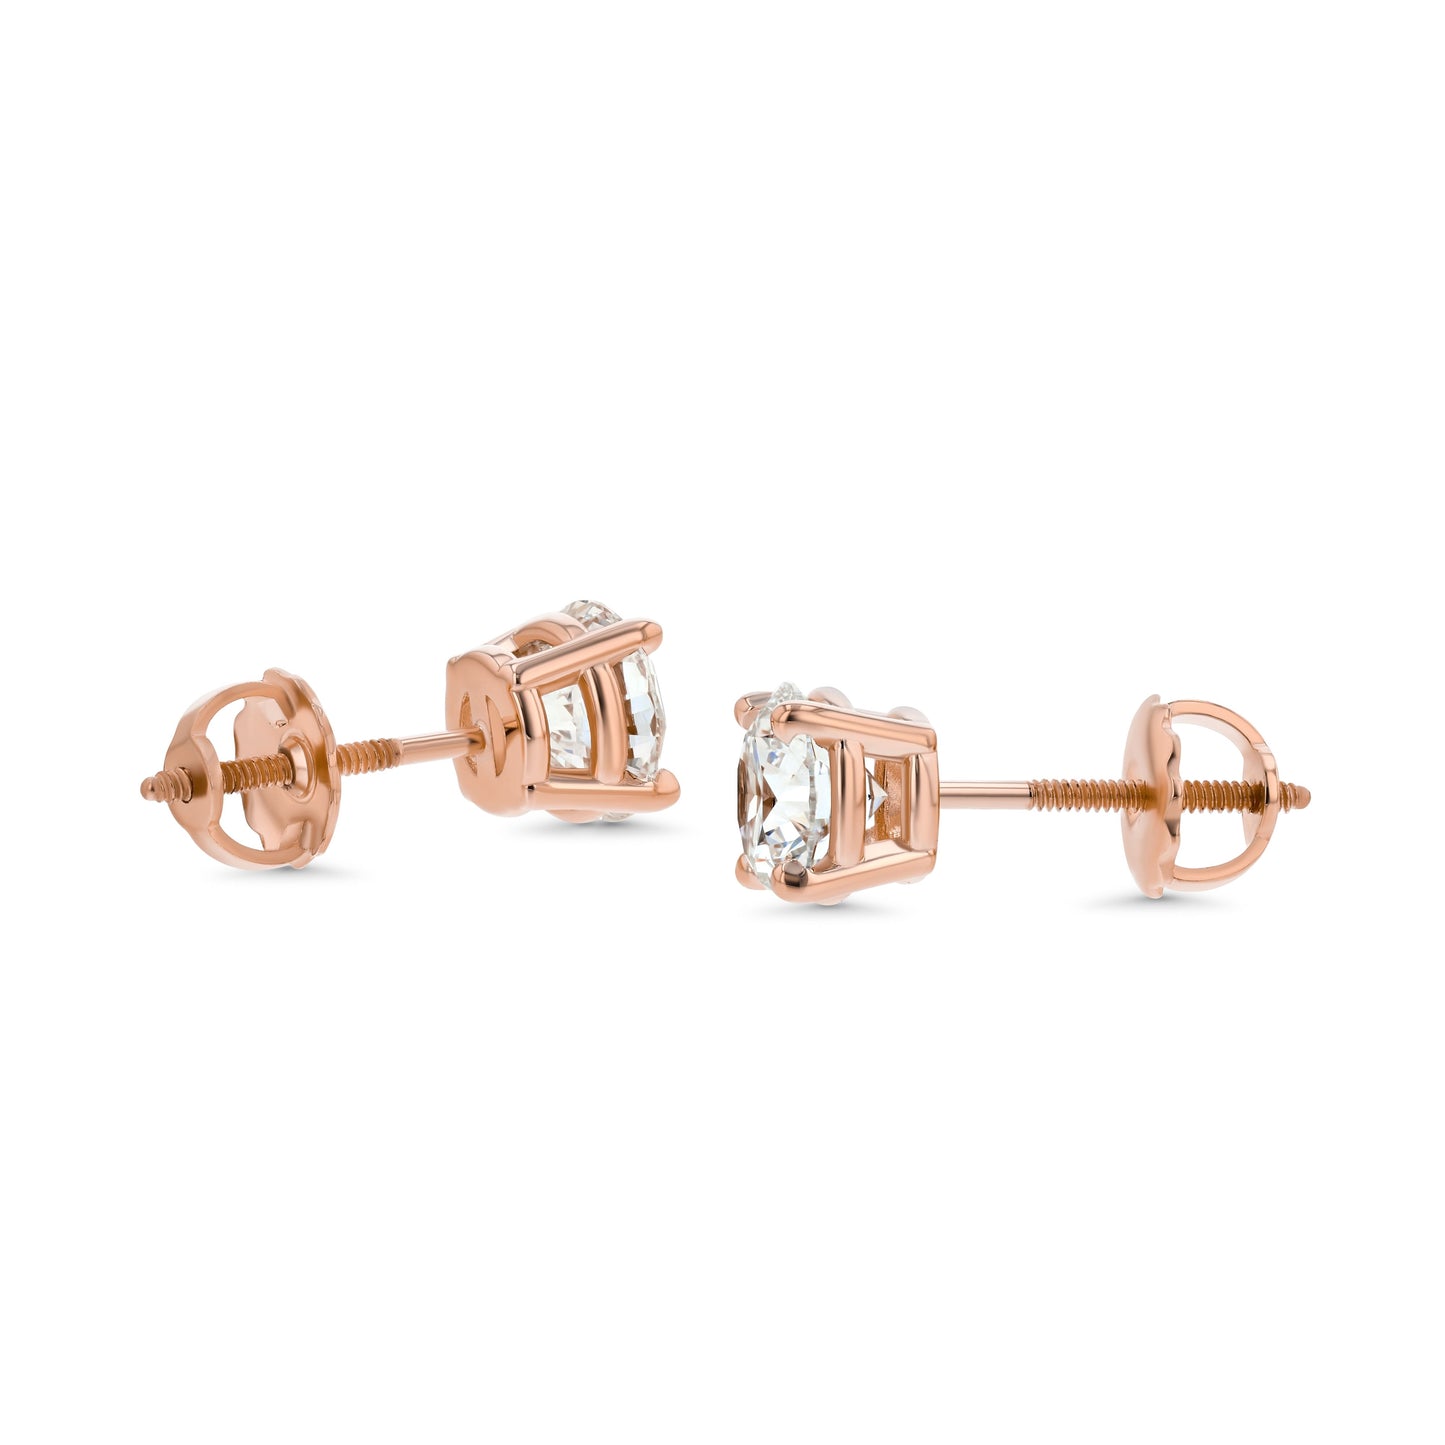 14k Rose Gold 4-prong Round Brilliant Diamond Stud Earrings (0.52 Ct. T.w., Si1-si2 Clarity, H-i Color)